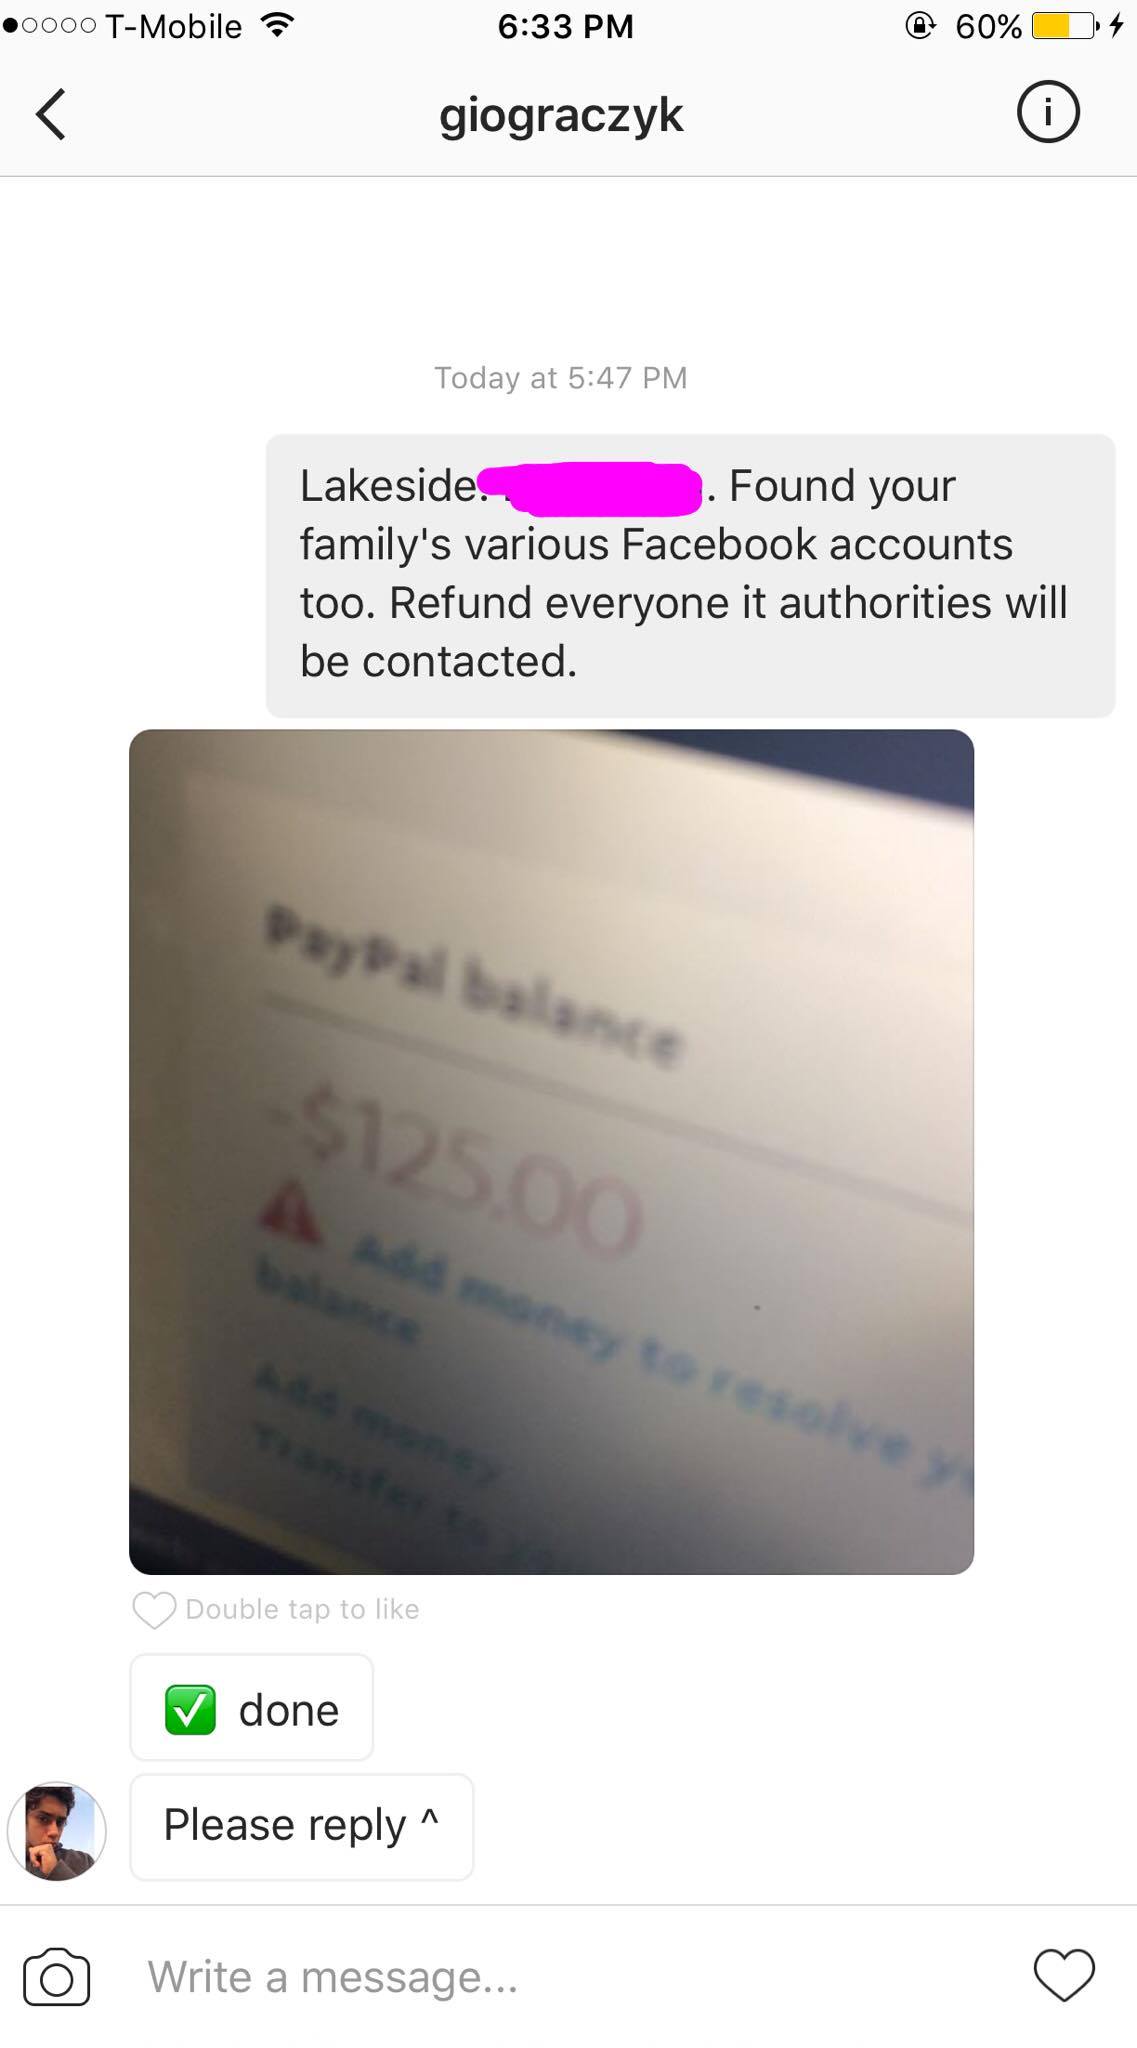 I decided to message the kid with his city and school info (which was public on his FB). But the screenshot didnt prove a refund went through and my friend still didnt get his money back.